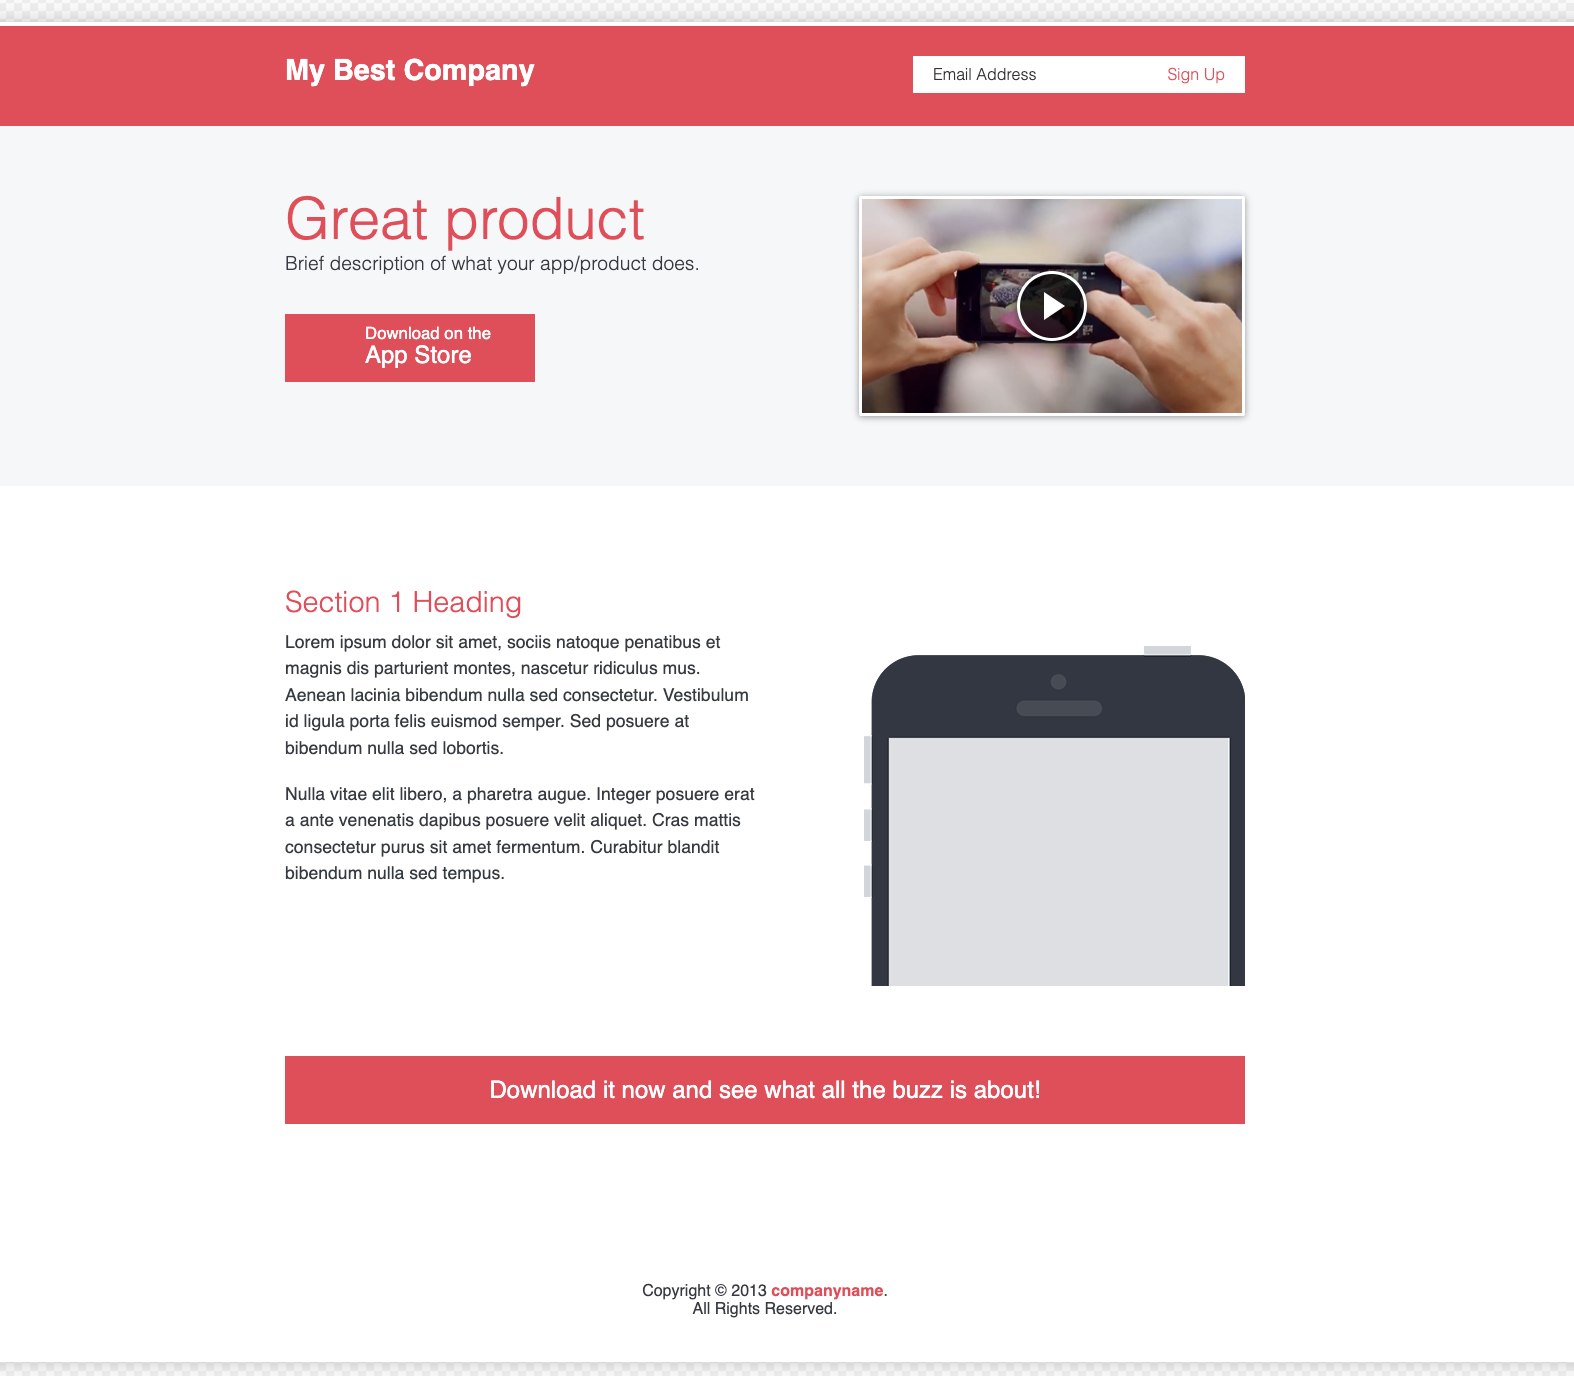 Business oriented email landing pages